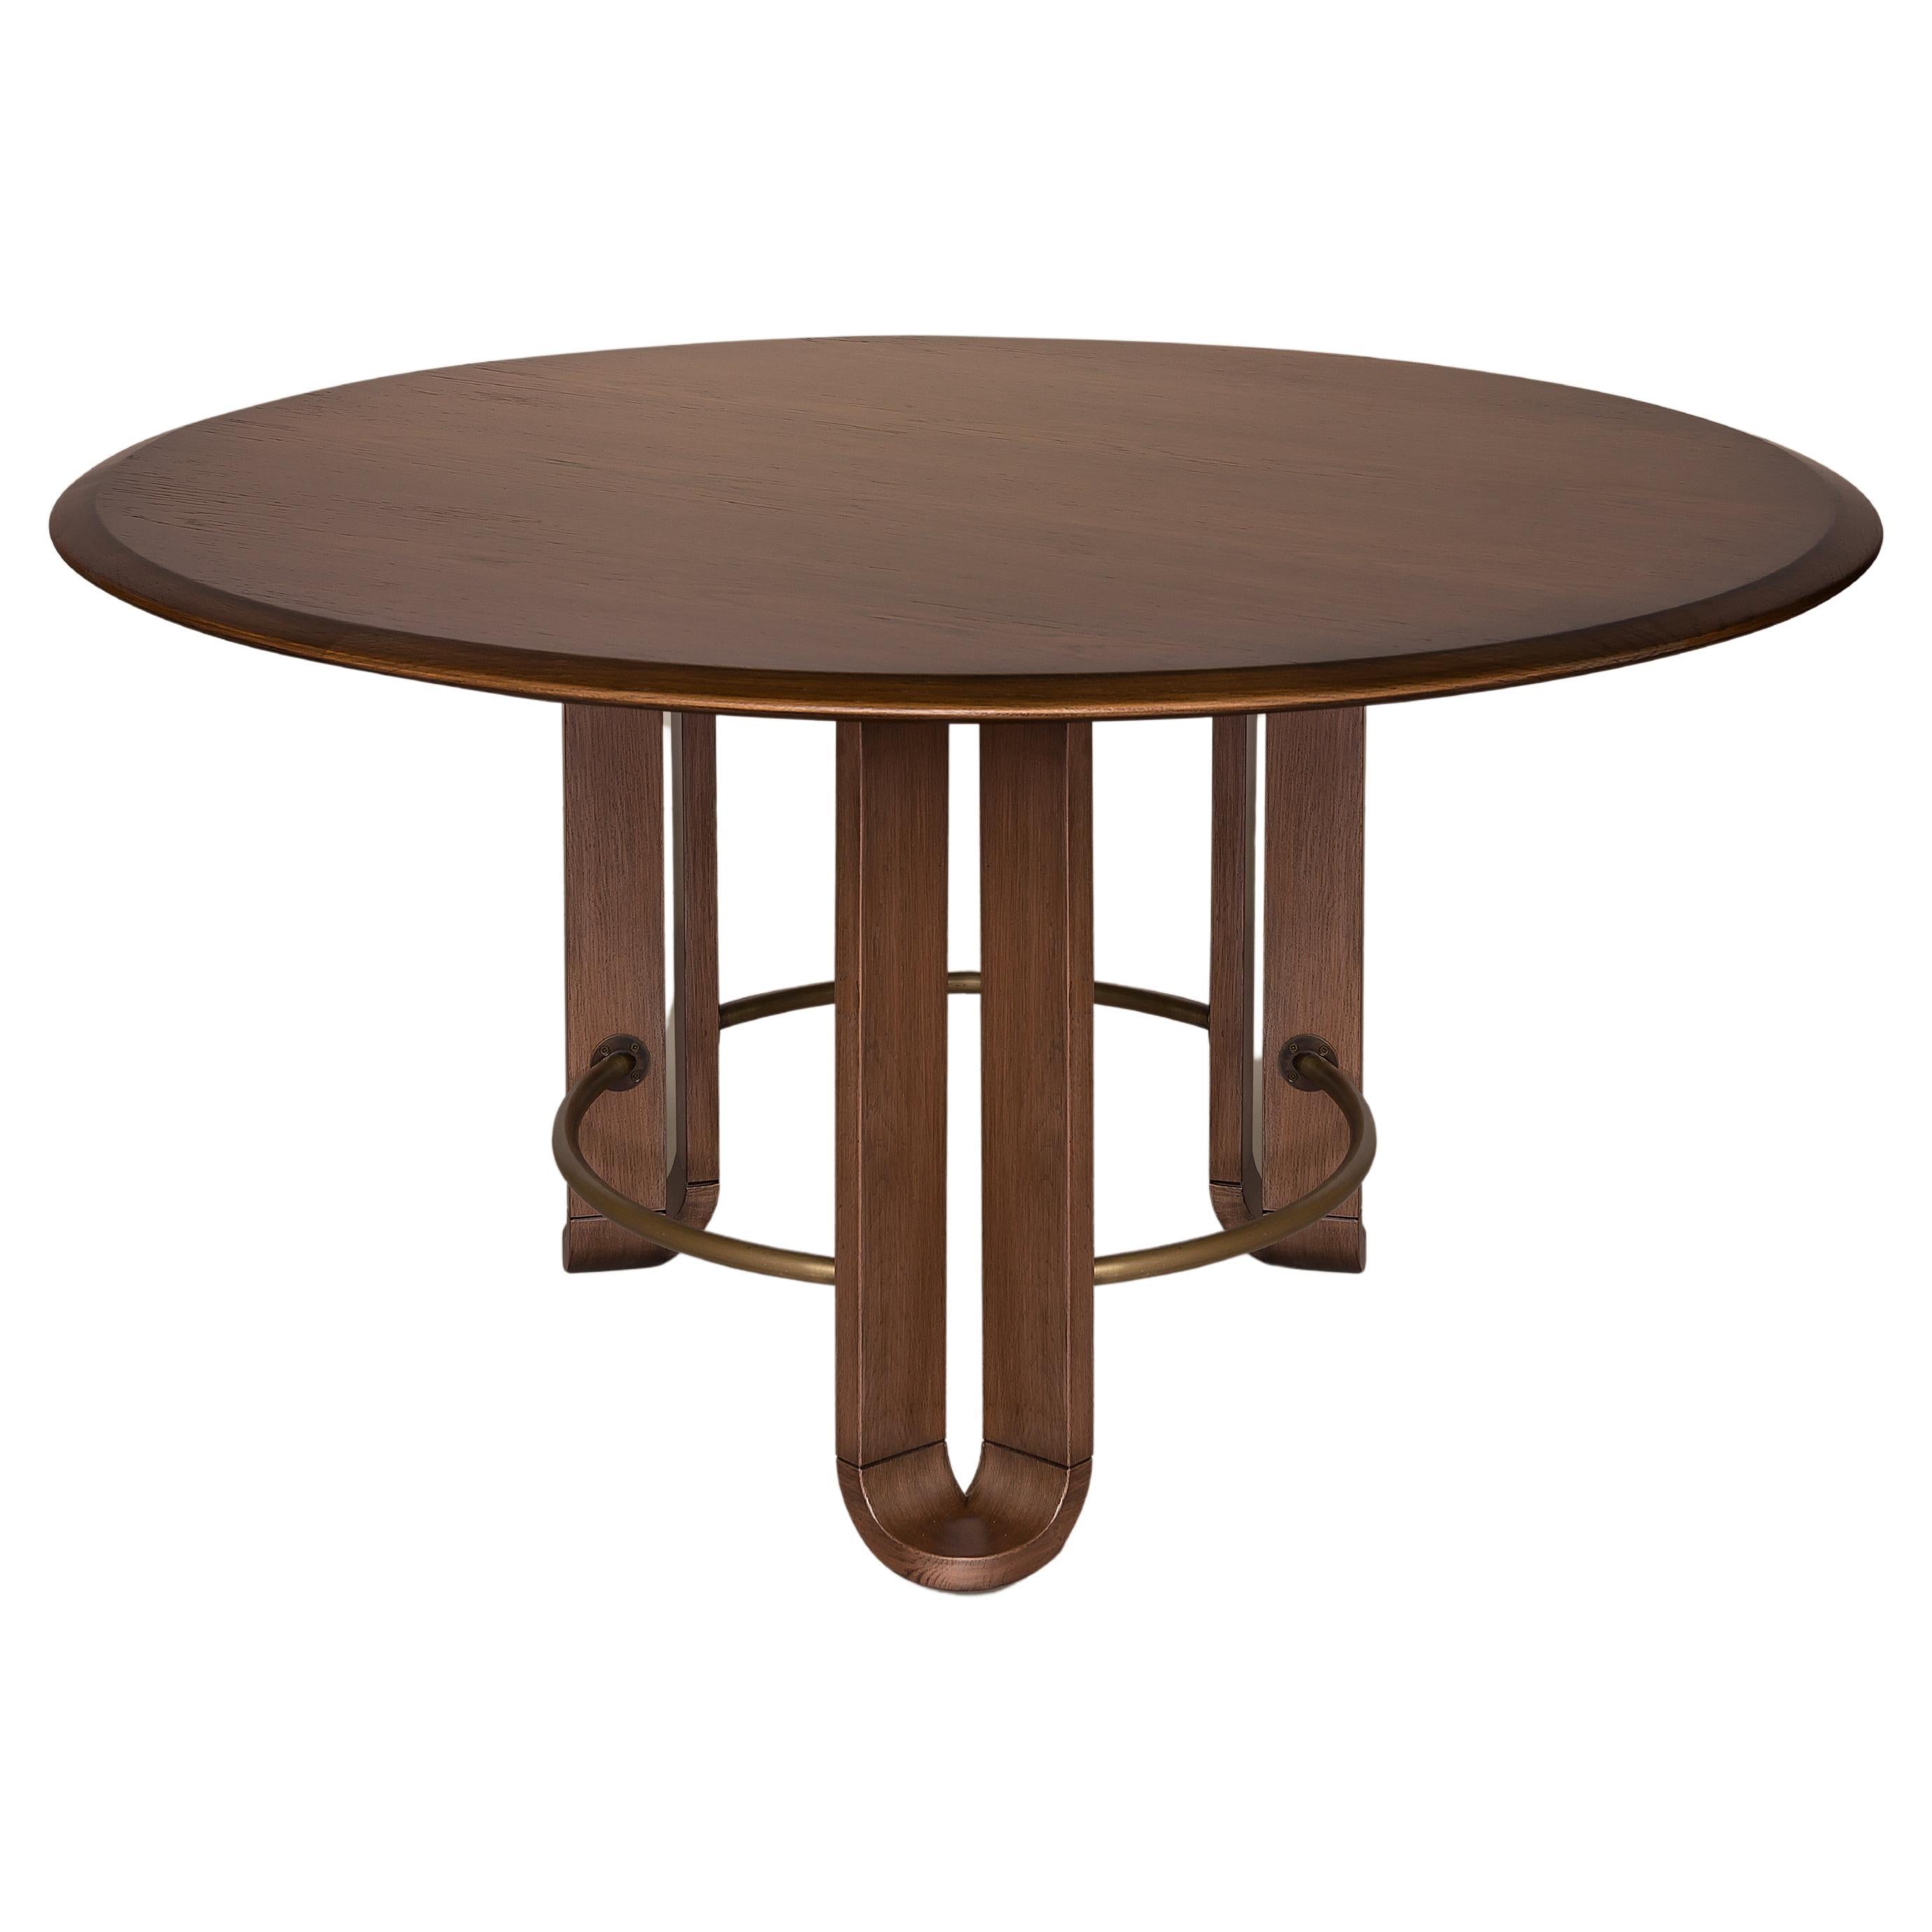 Dining Table, Round, Walnut with Antique Plated Metal Details